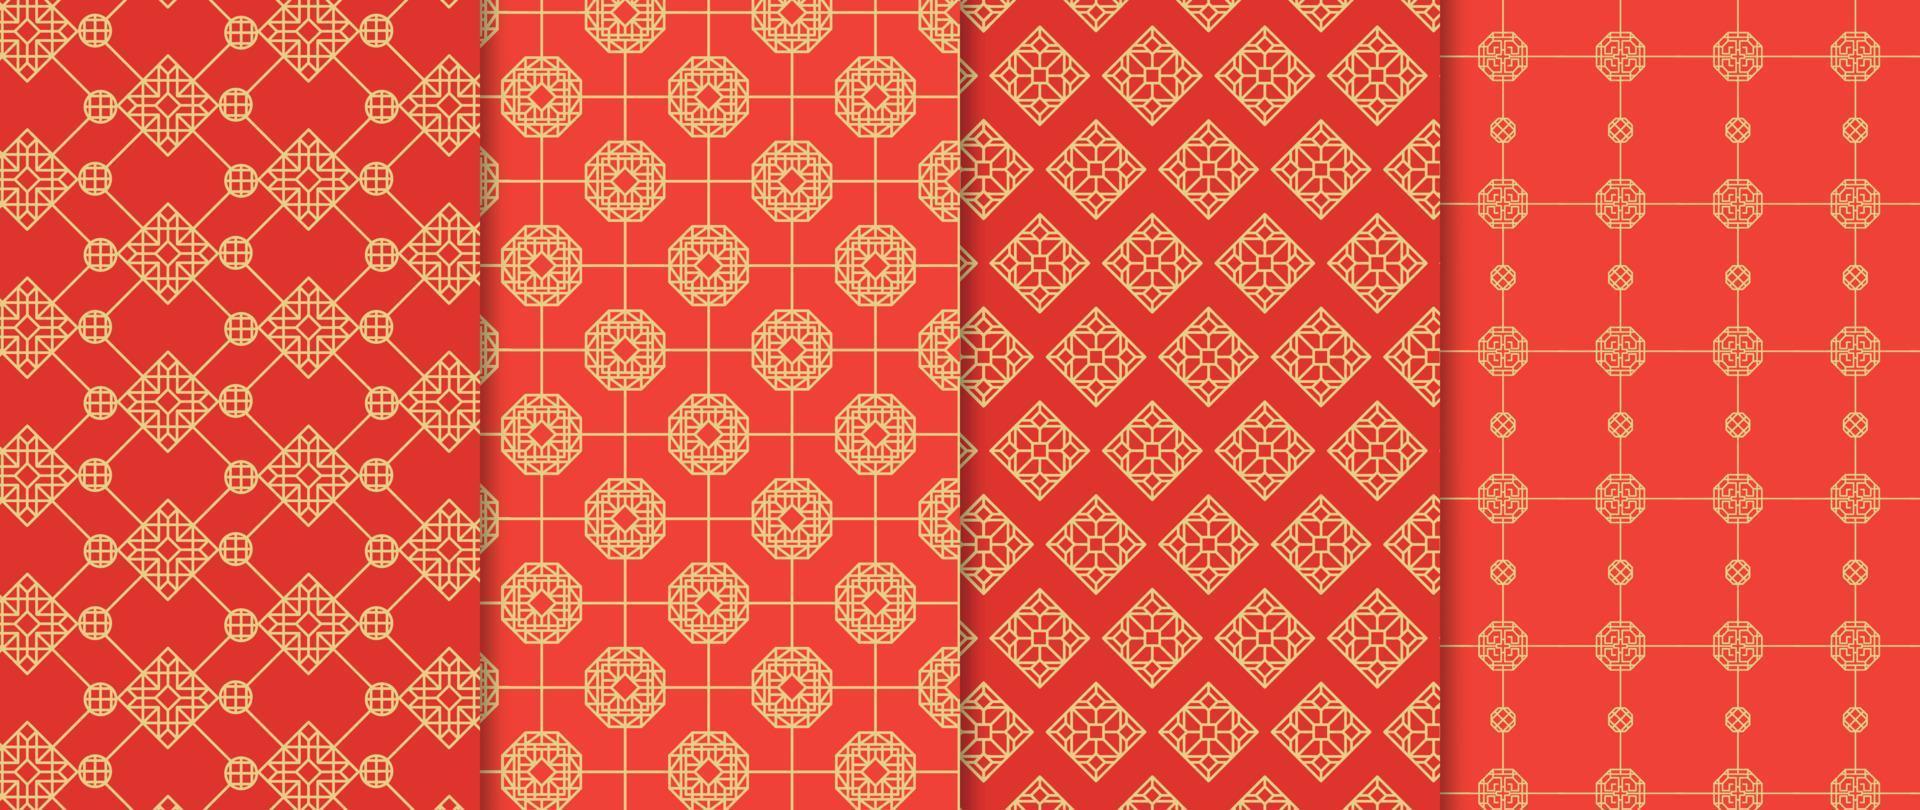 Set of Chinese patterns background vector. Abstract geometric shape, grid vector patterns and swatches. Luxury oriental wallpaper design for fabric, wallpaper, banners, prints and wall arts.